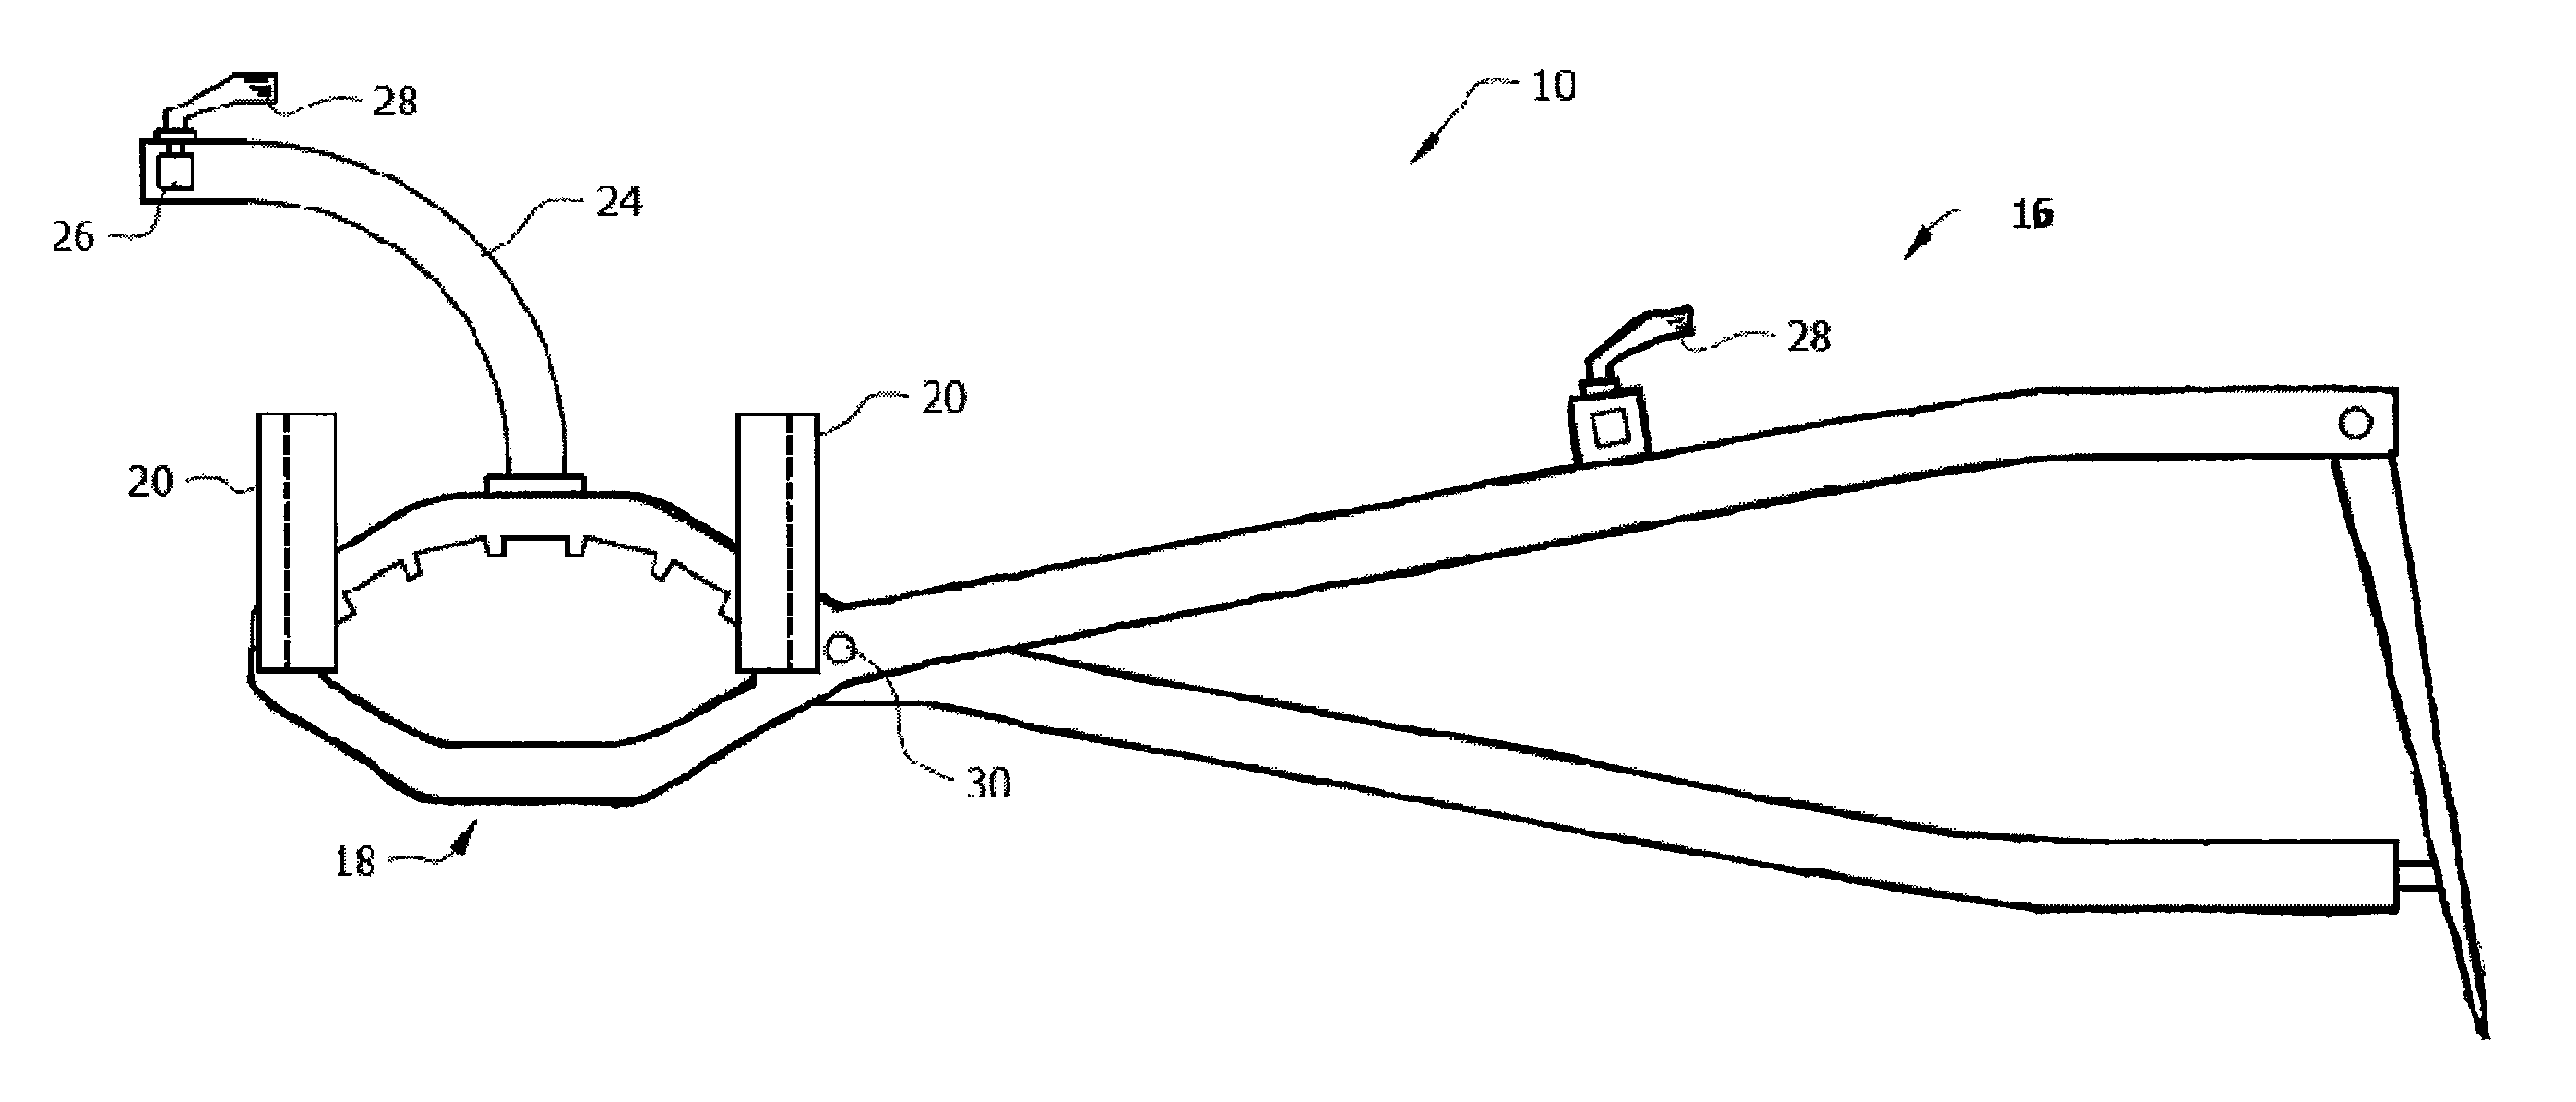 Apparatus for osteotomy and graft preparation